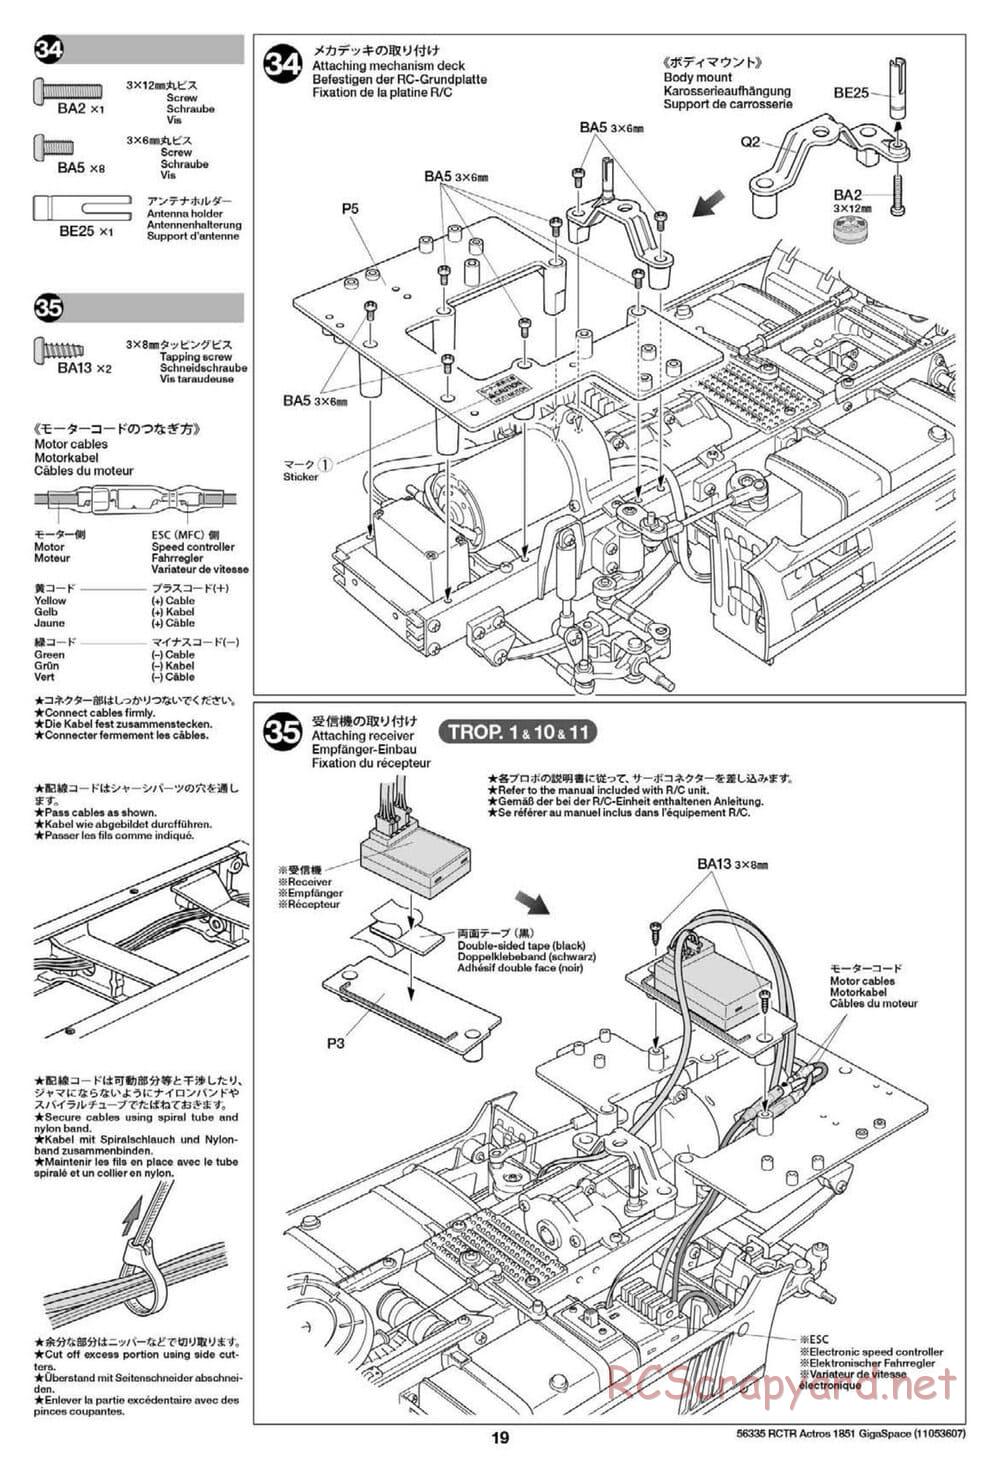 Tamiya - Mercedes-Benz Actros 1851 Gigaspace Tractor Truck Chassis - Manual - Page 19